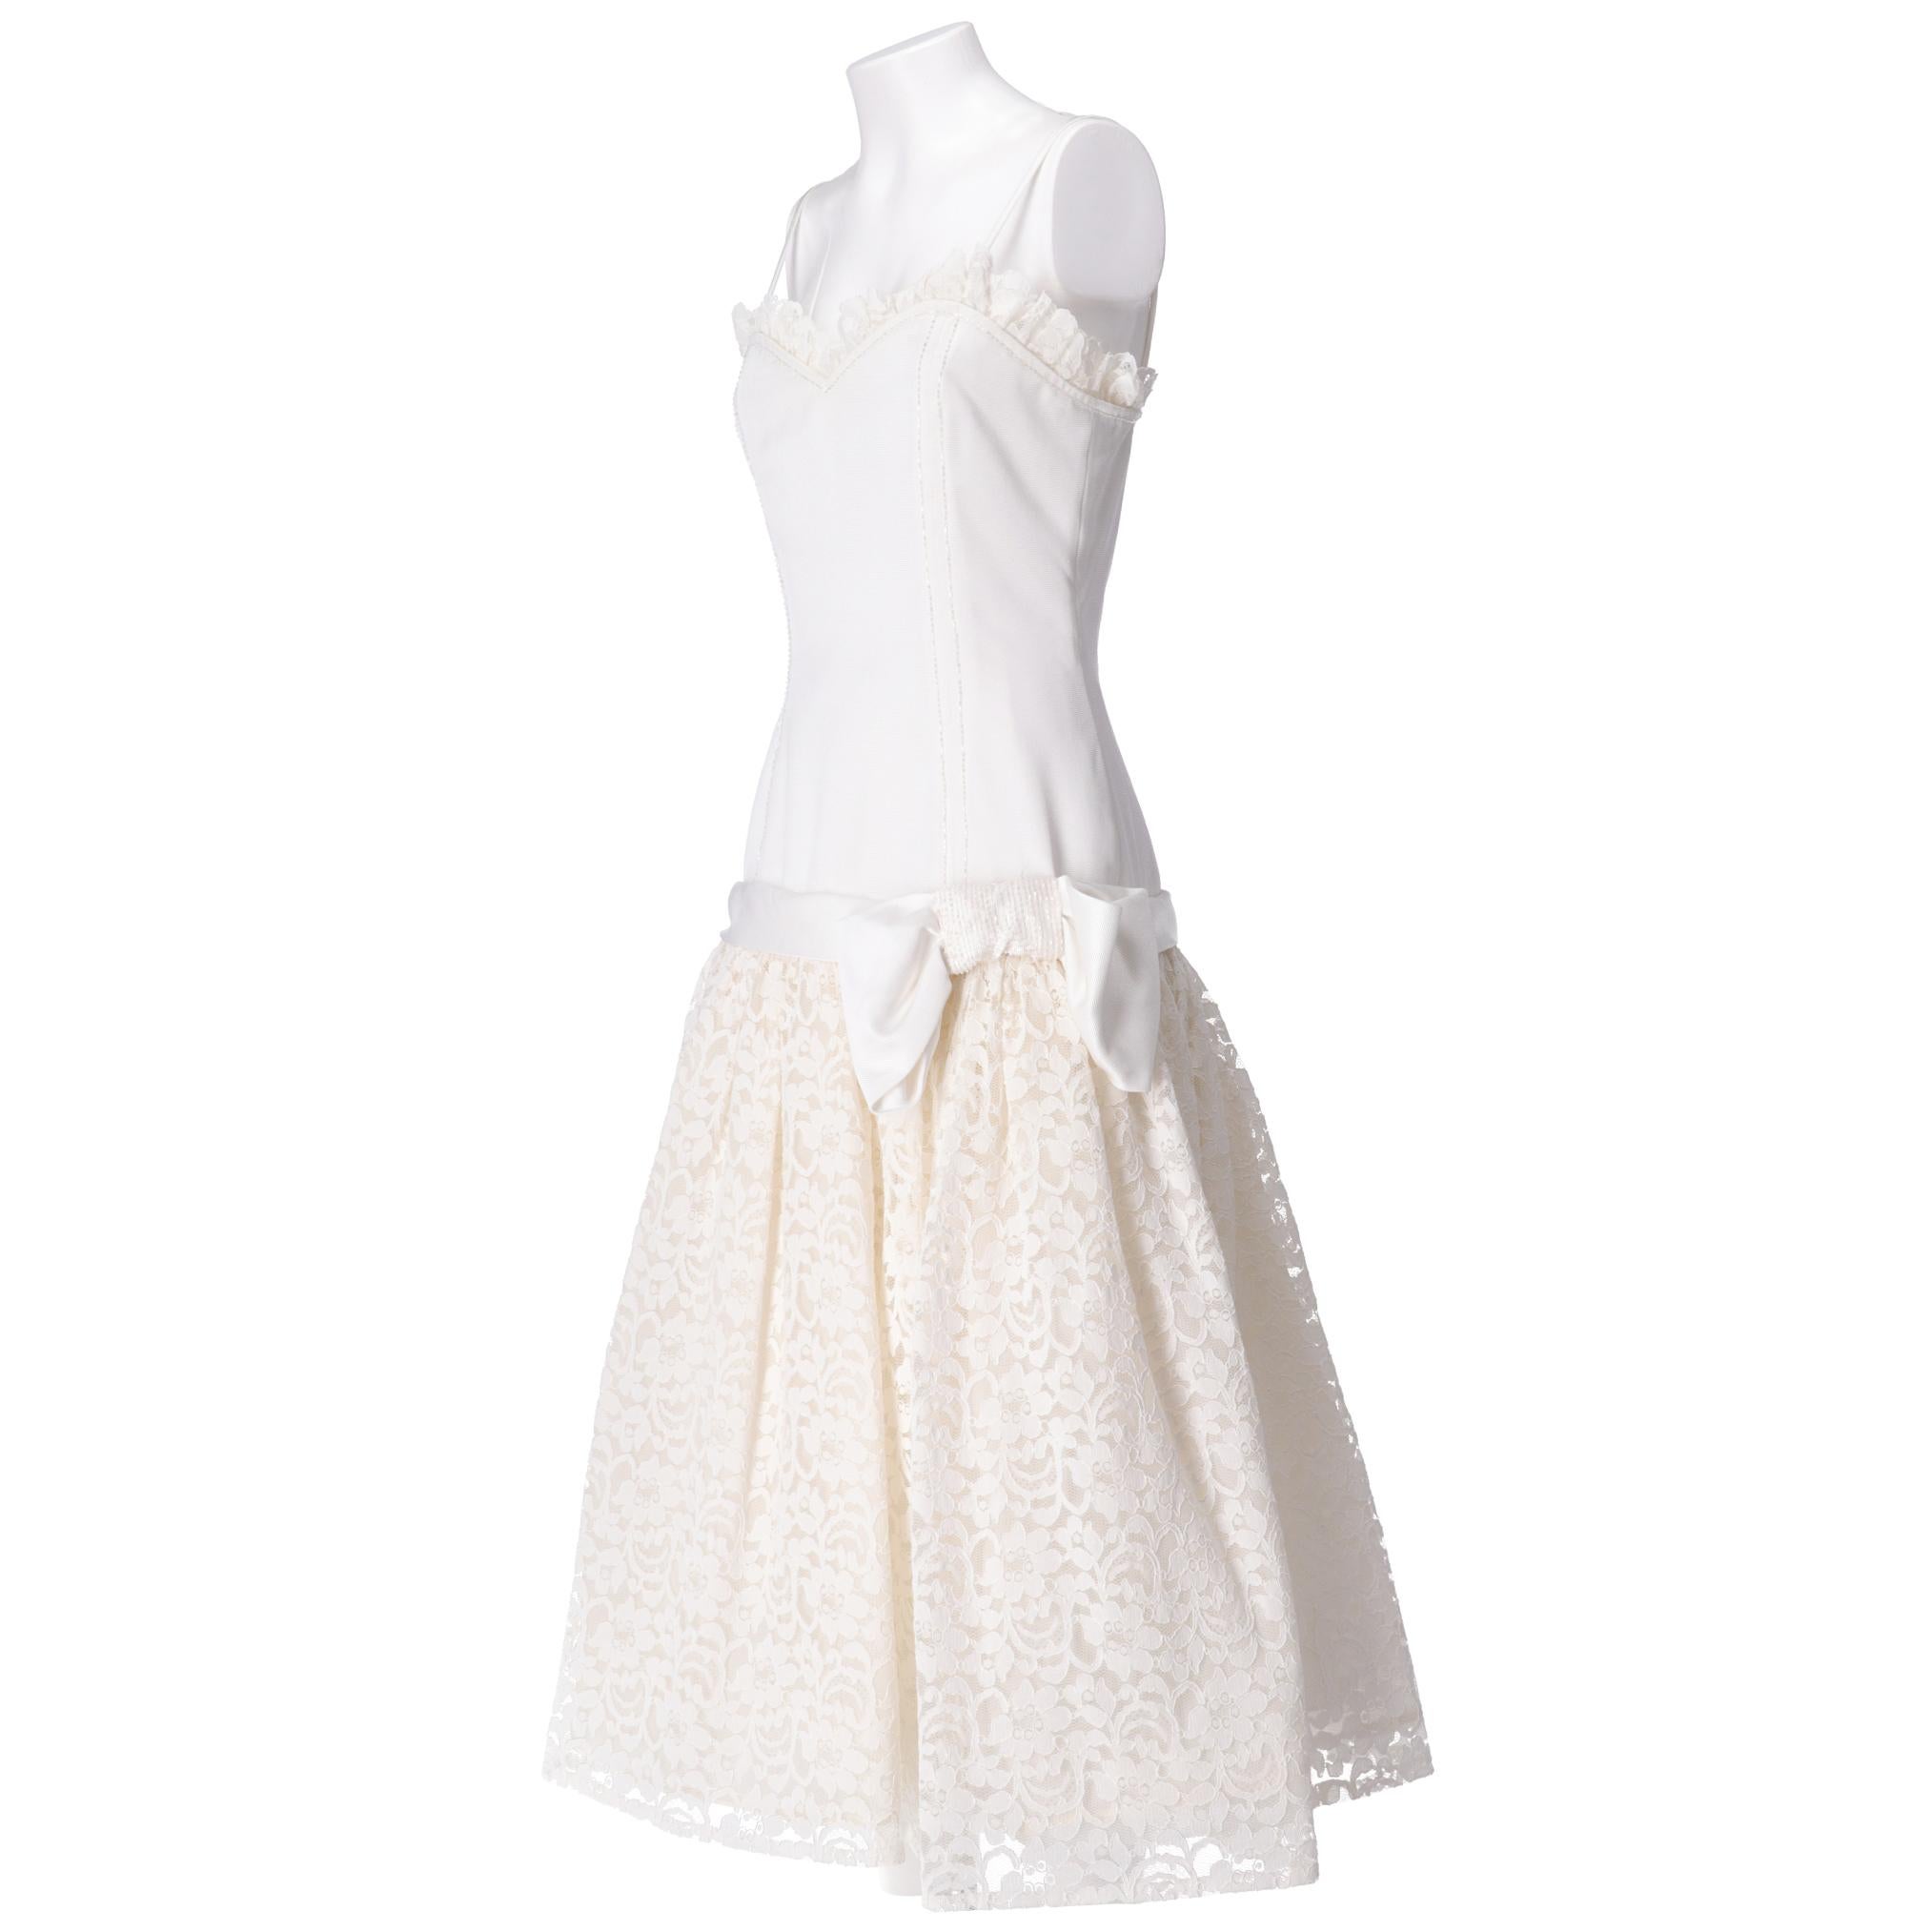 White tailored wedding dress, with layered bell-shaped skirt in lace and tulle long up to the ankles, sweetheart neckline with shoulder straps, large bow on the side with decorative beads.

Years: 1980s

Made in Italy 

Size: 42 IT

Linear